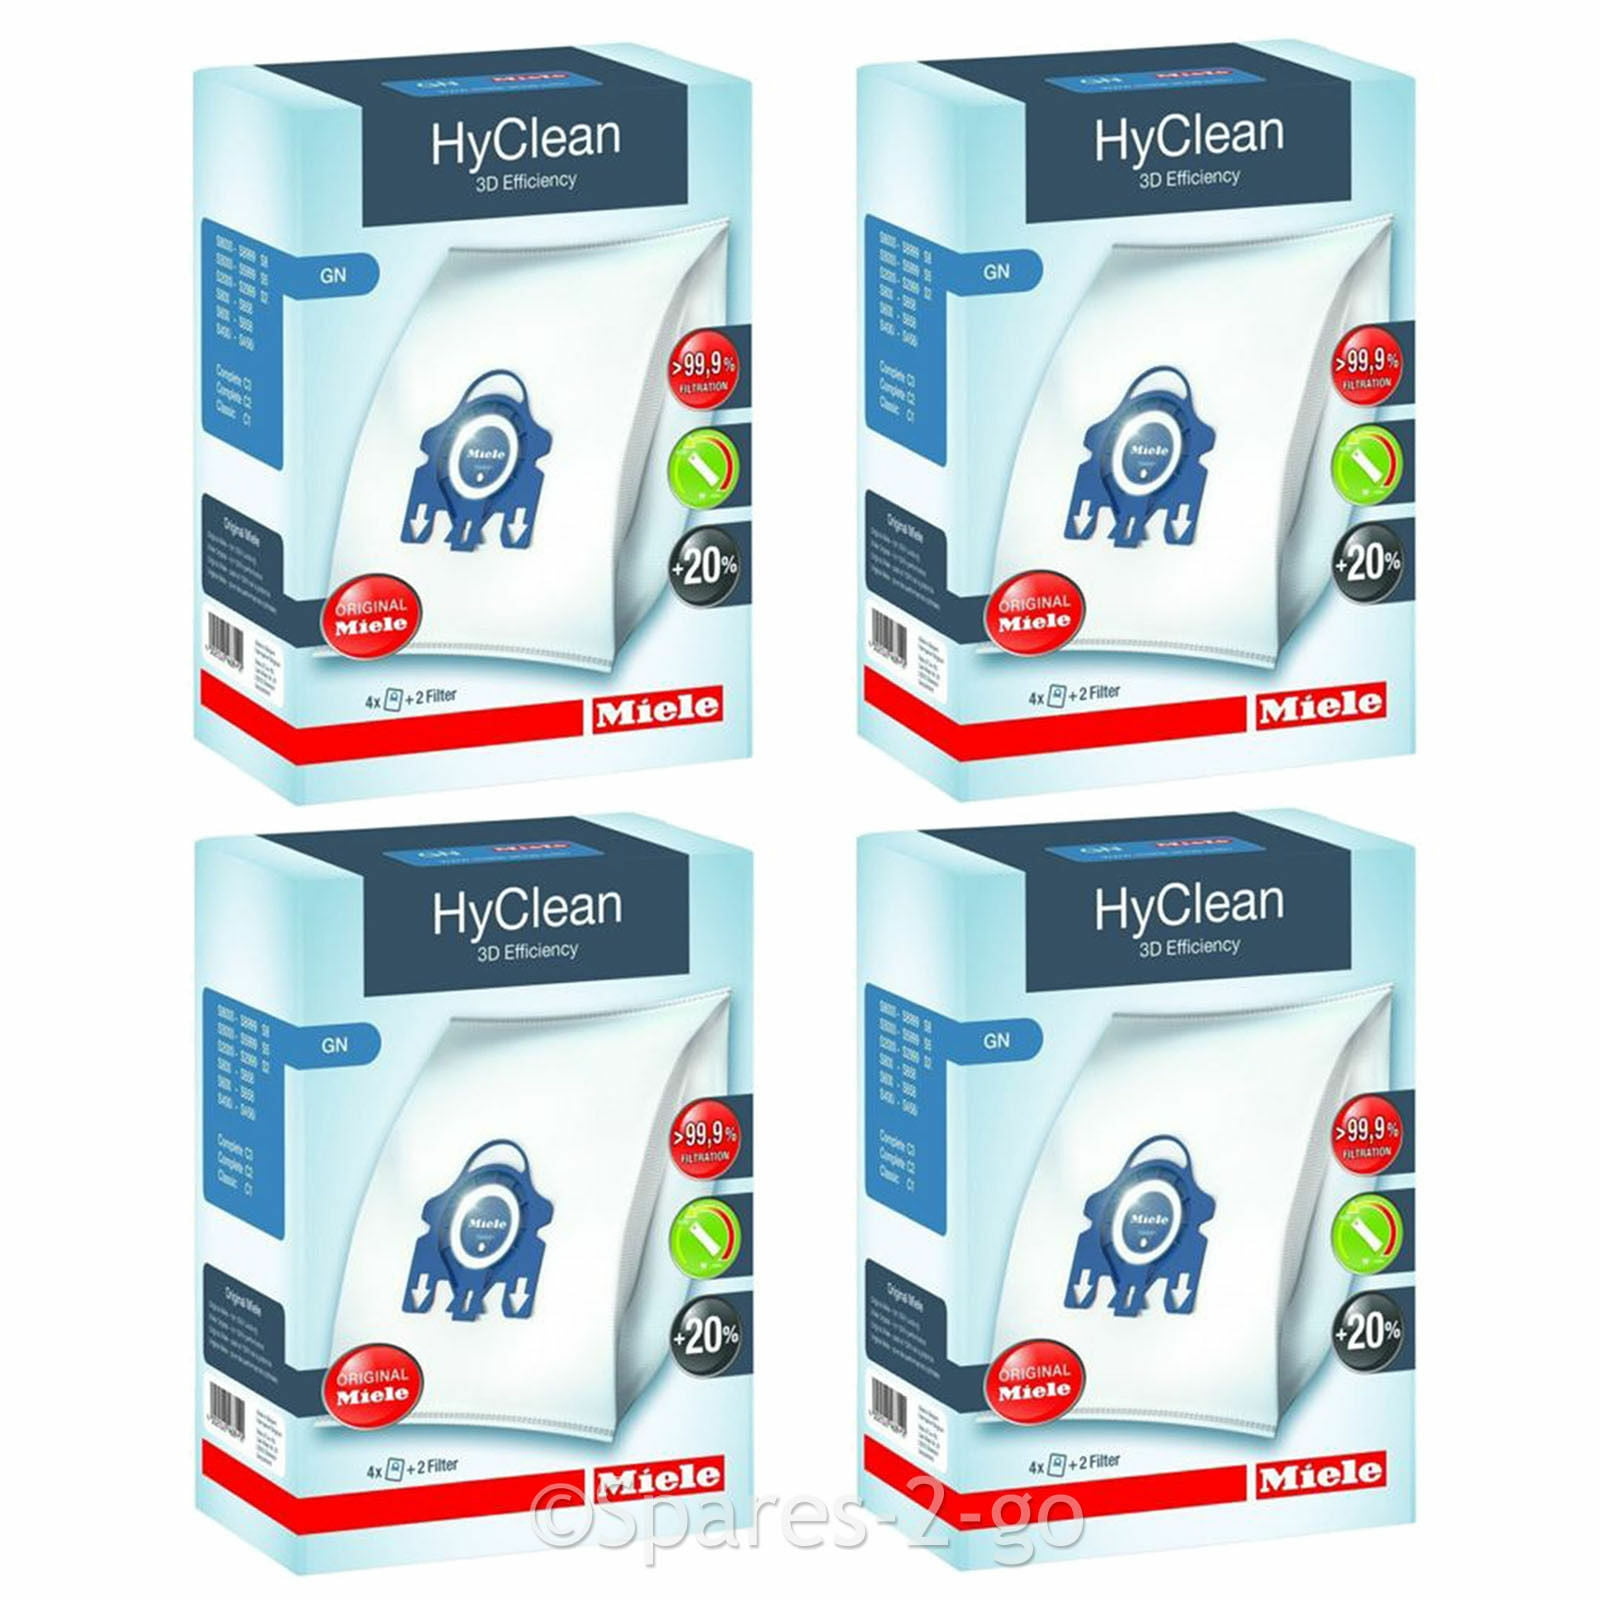 Details about   12x 3D Efficiency HyClean Dust AirClean Bags For Miele GN Vacuum Cleaner+Filters 